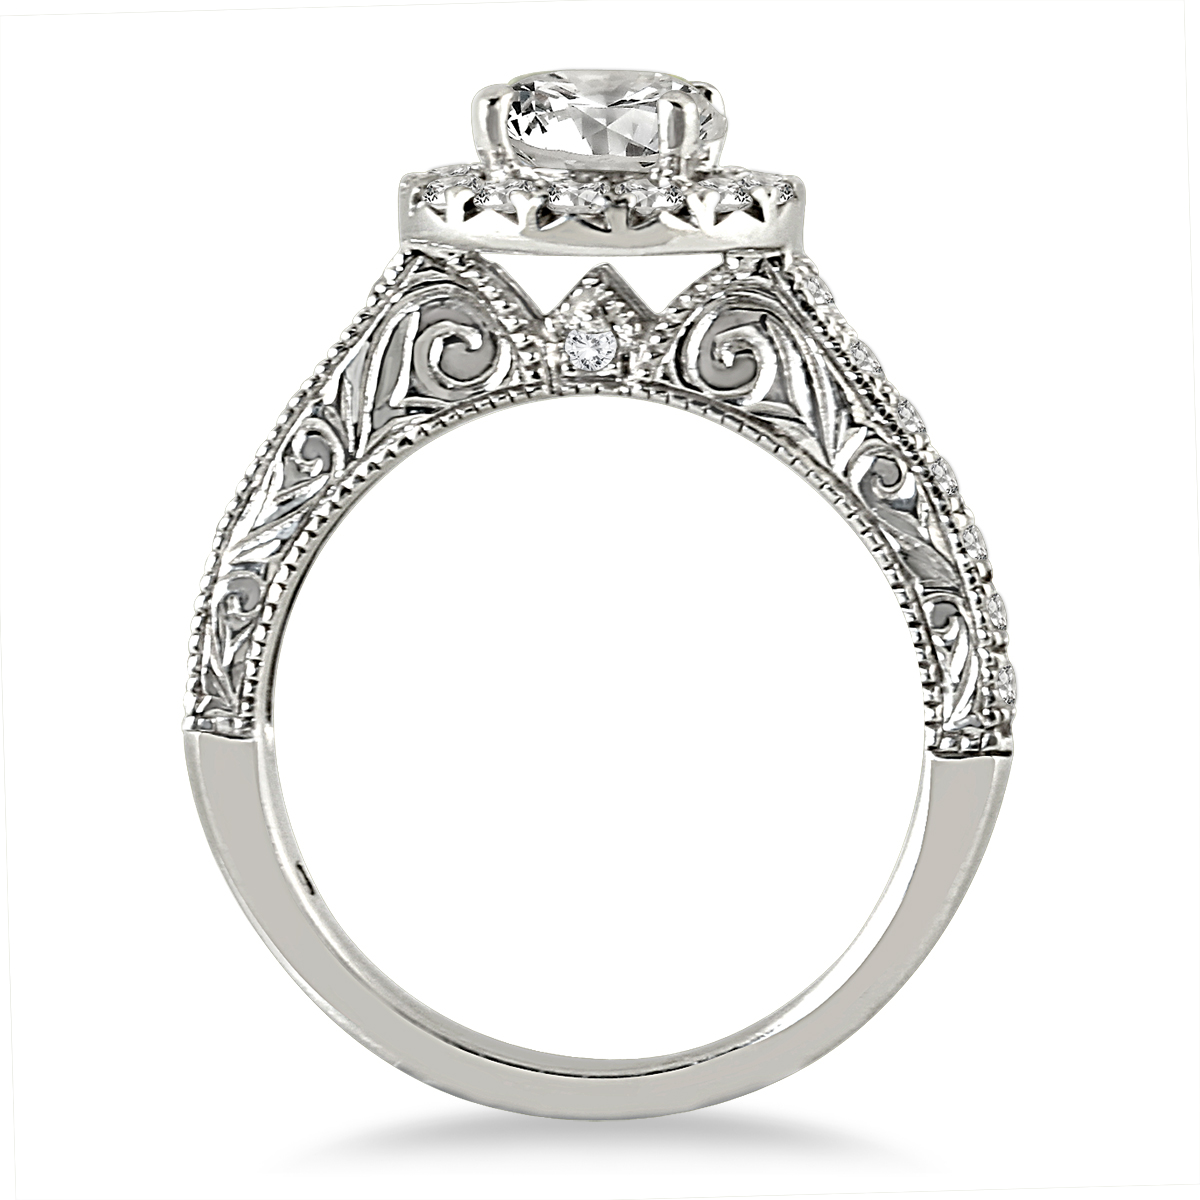 szul.com AGS Certified 1 1/2 Carat TW Halo Diamond Engagement Ring in 14K White Gold (I-J Color, I2-I3 Clarit